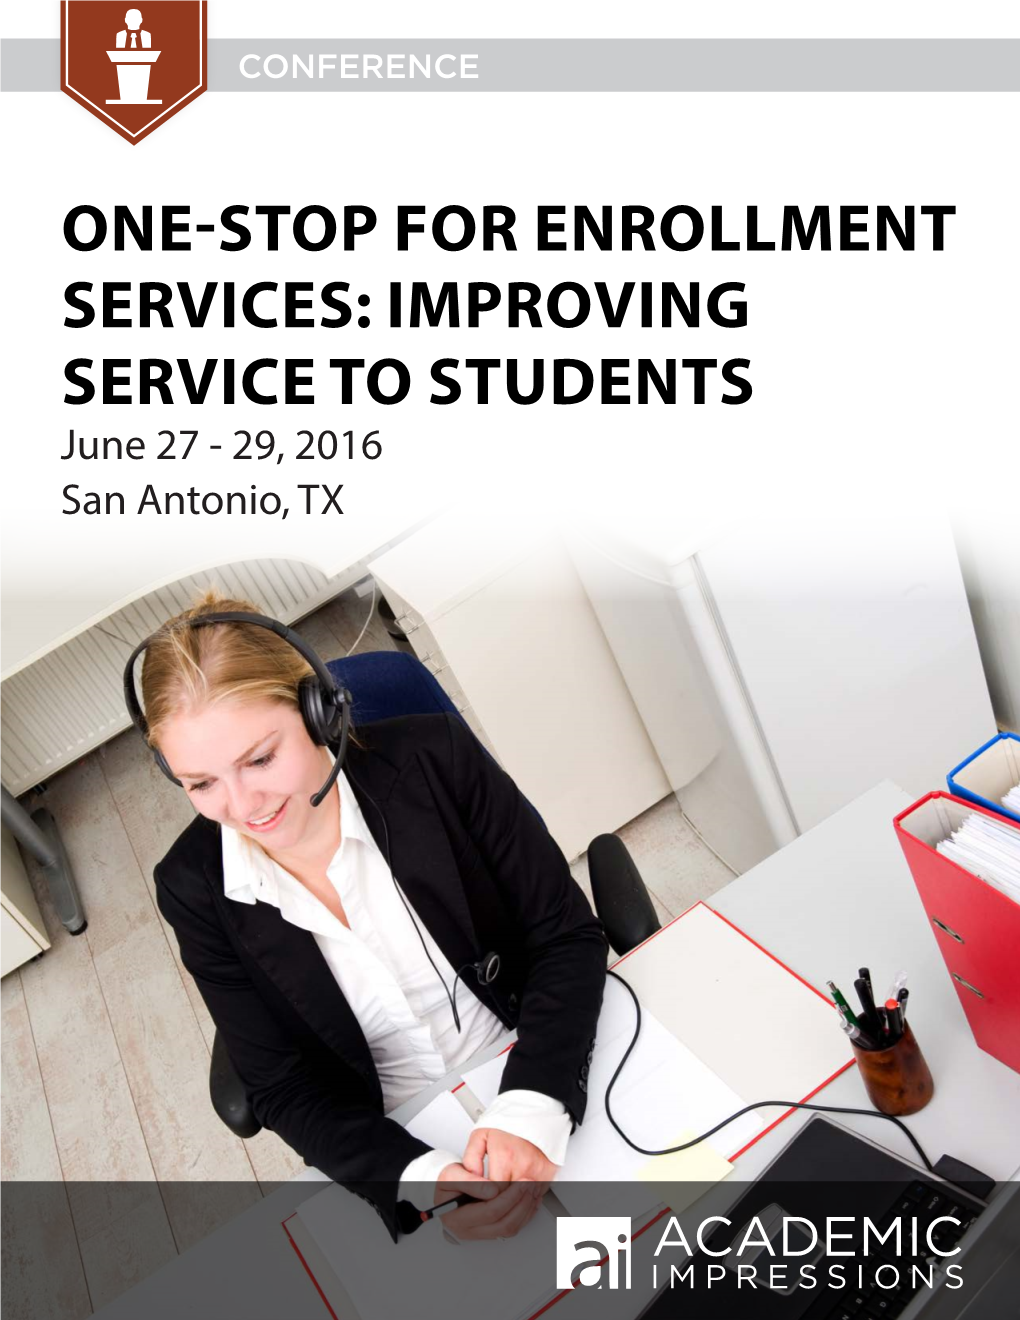 ONE-STOP for ENROLLMENT SERVICES: IMPROVING SERVICE to STUDENTS June 27 - 29, 2016 San Antonio, TX CONFERENCE